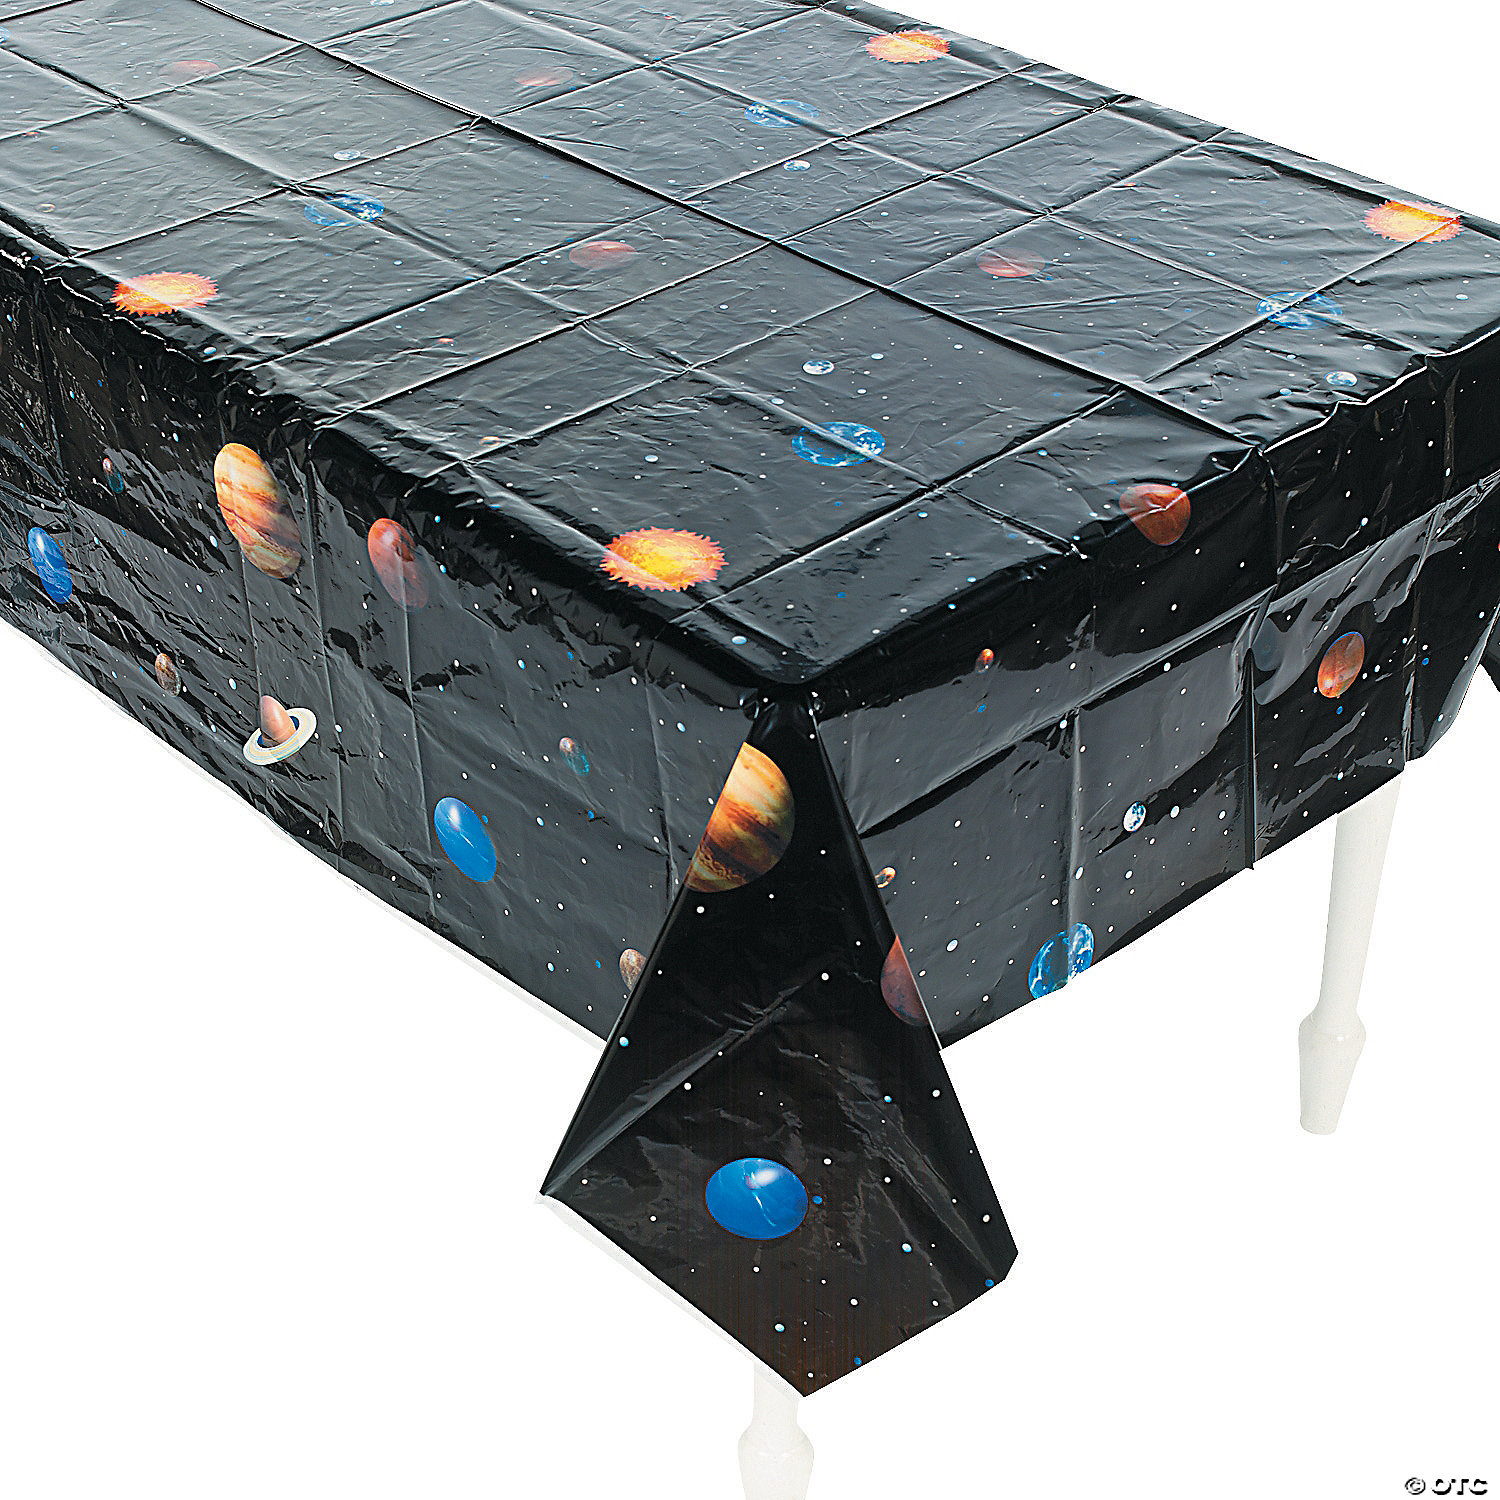 Plastic Solar System Table Cover Planet Design for Kids Outer Space Theme Birthday Party Decorations and Supplies 54 x 108 Inch 3 Pieces Outer Space Tablecloth Decorations